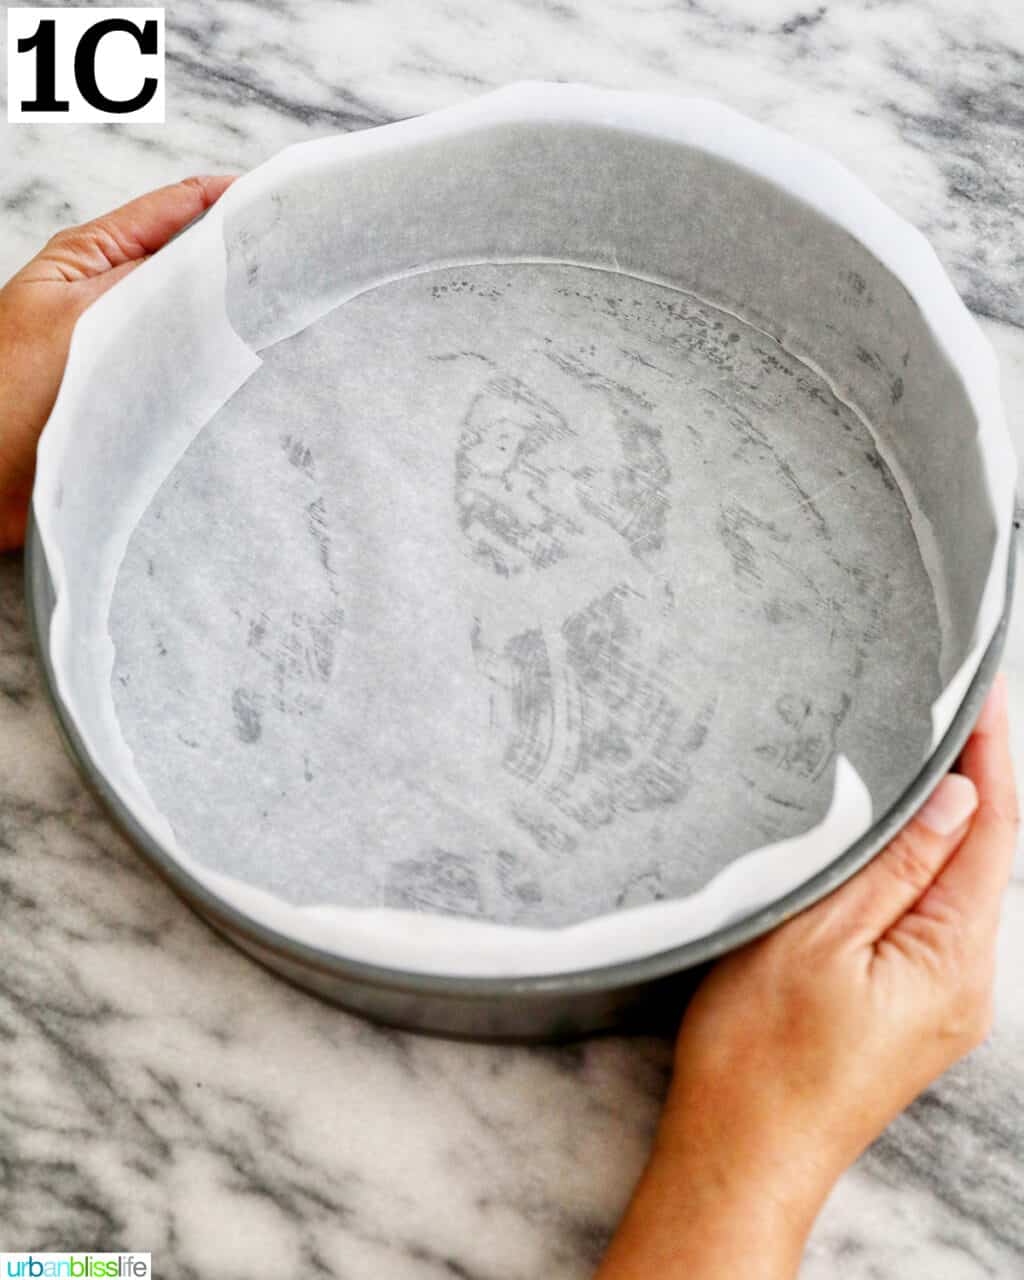 hands holding a springform pan lined with parchment paper.